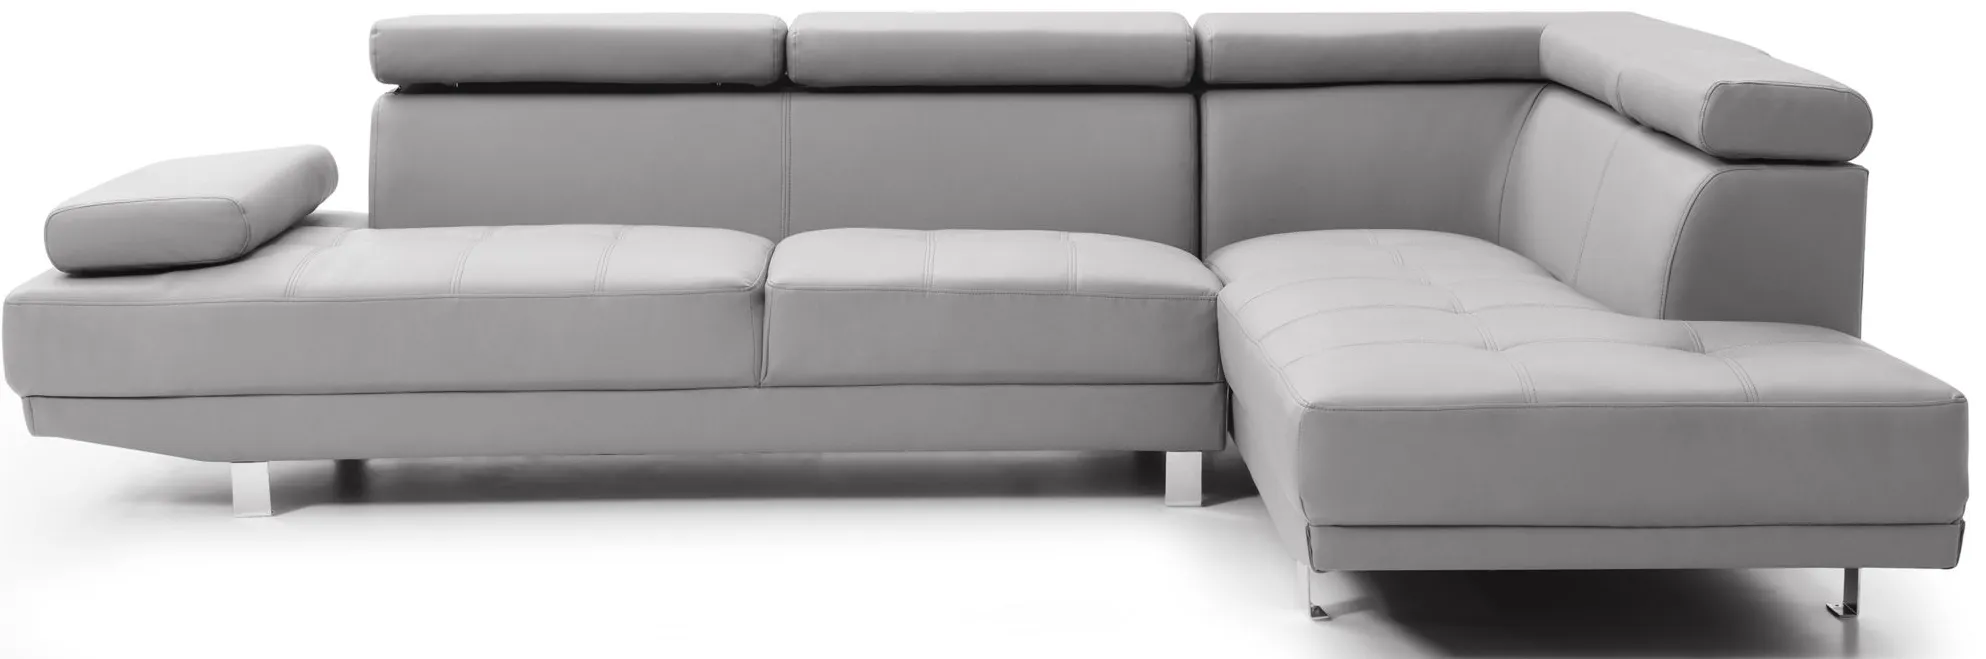 Riveredge 2-pc. Sectional Sofa in Gray by Glory Furniture